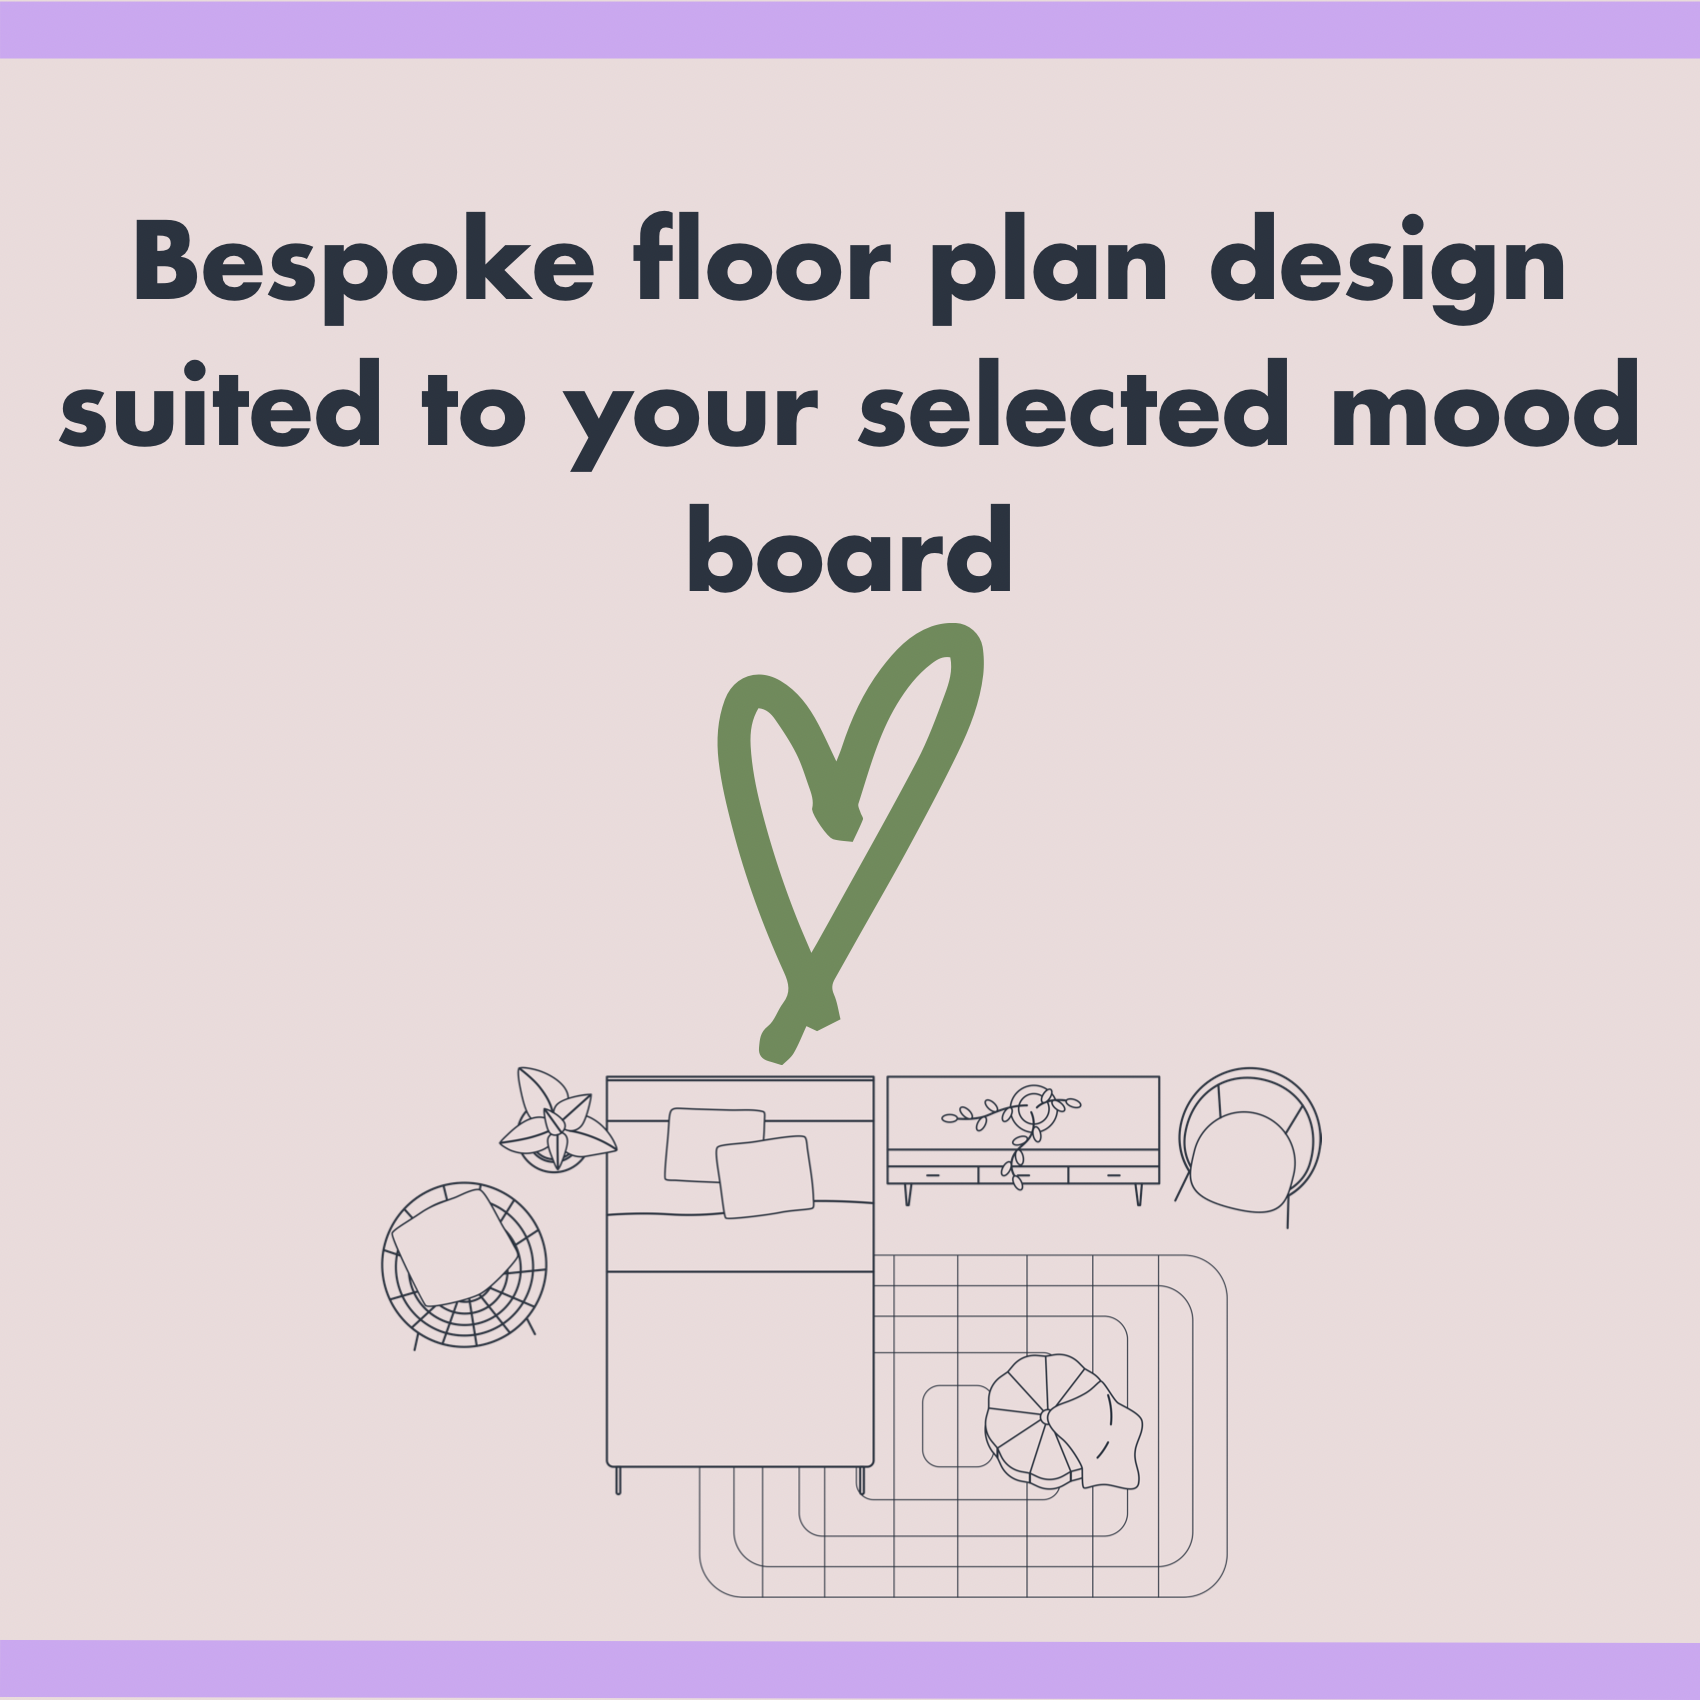 Bespoke floor plan design suited to your selected mood board - Playhaus Interiors